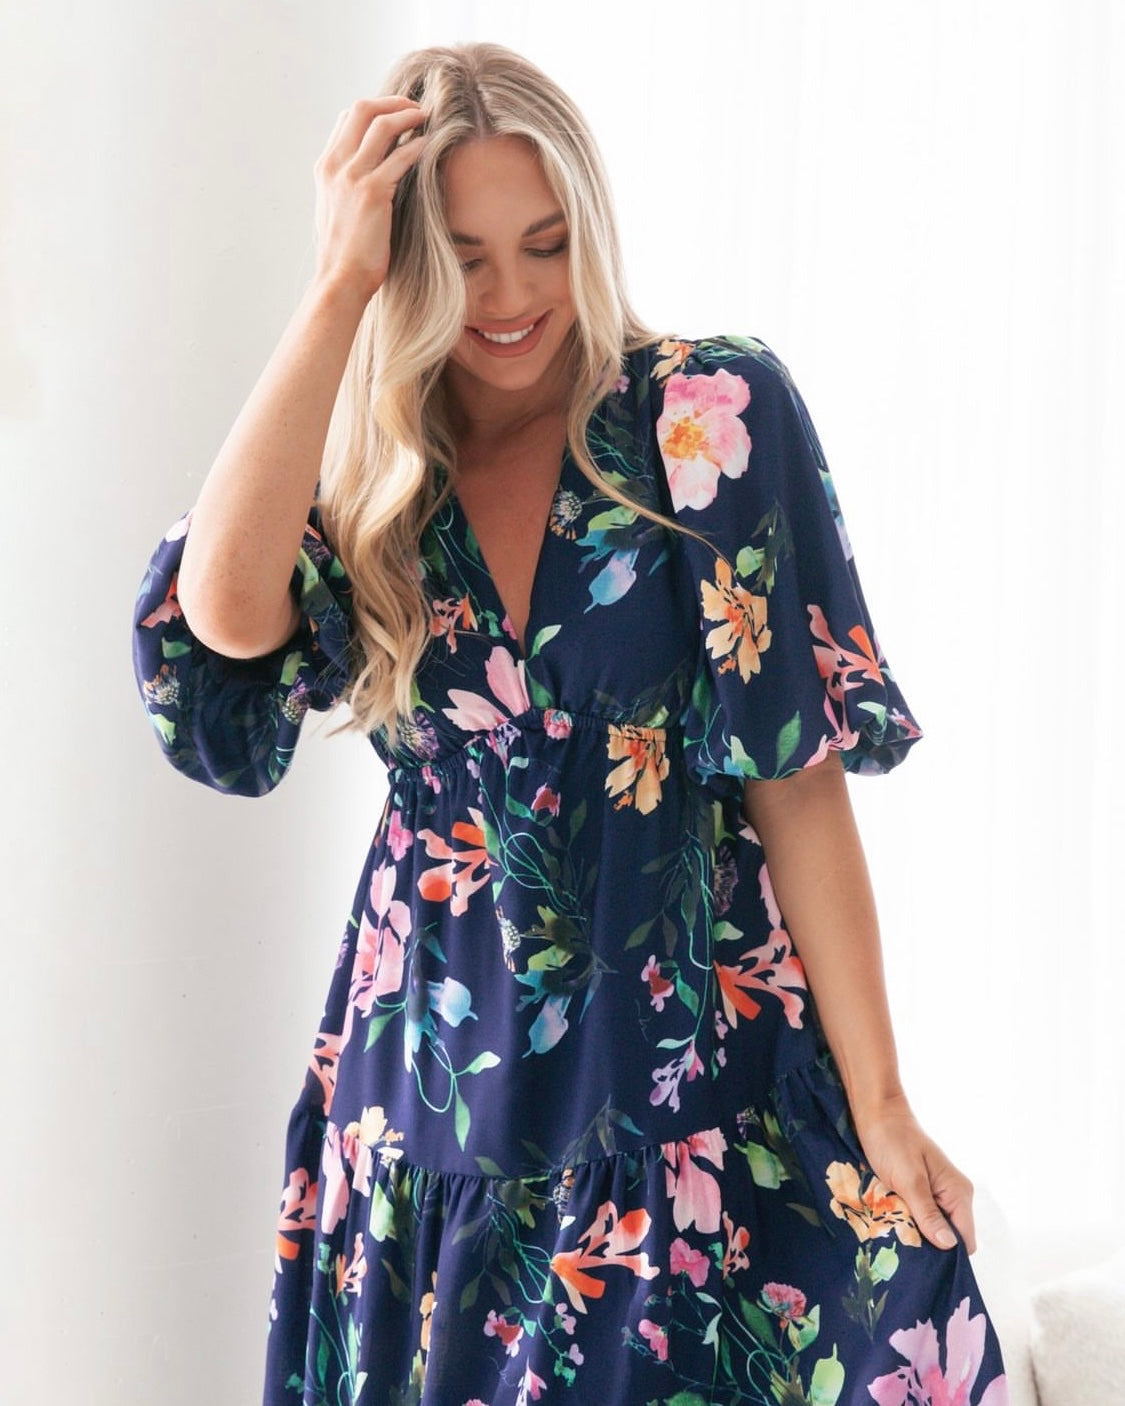 Picture Perfect Floral Midi Dress: Picture Perfect by name, Picture Perfect by nature. The stunning watercolour floral print against a navy background make this dress the picture perfect option to you - Ciao Bella Dresses 